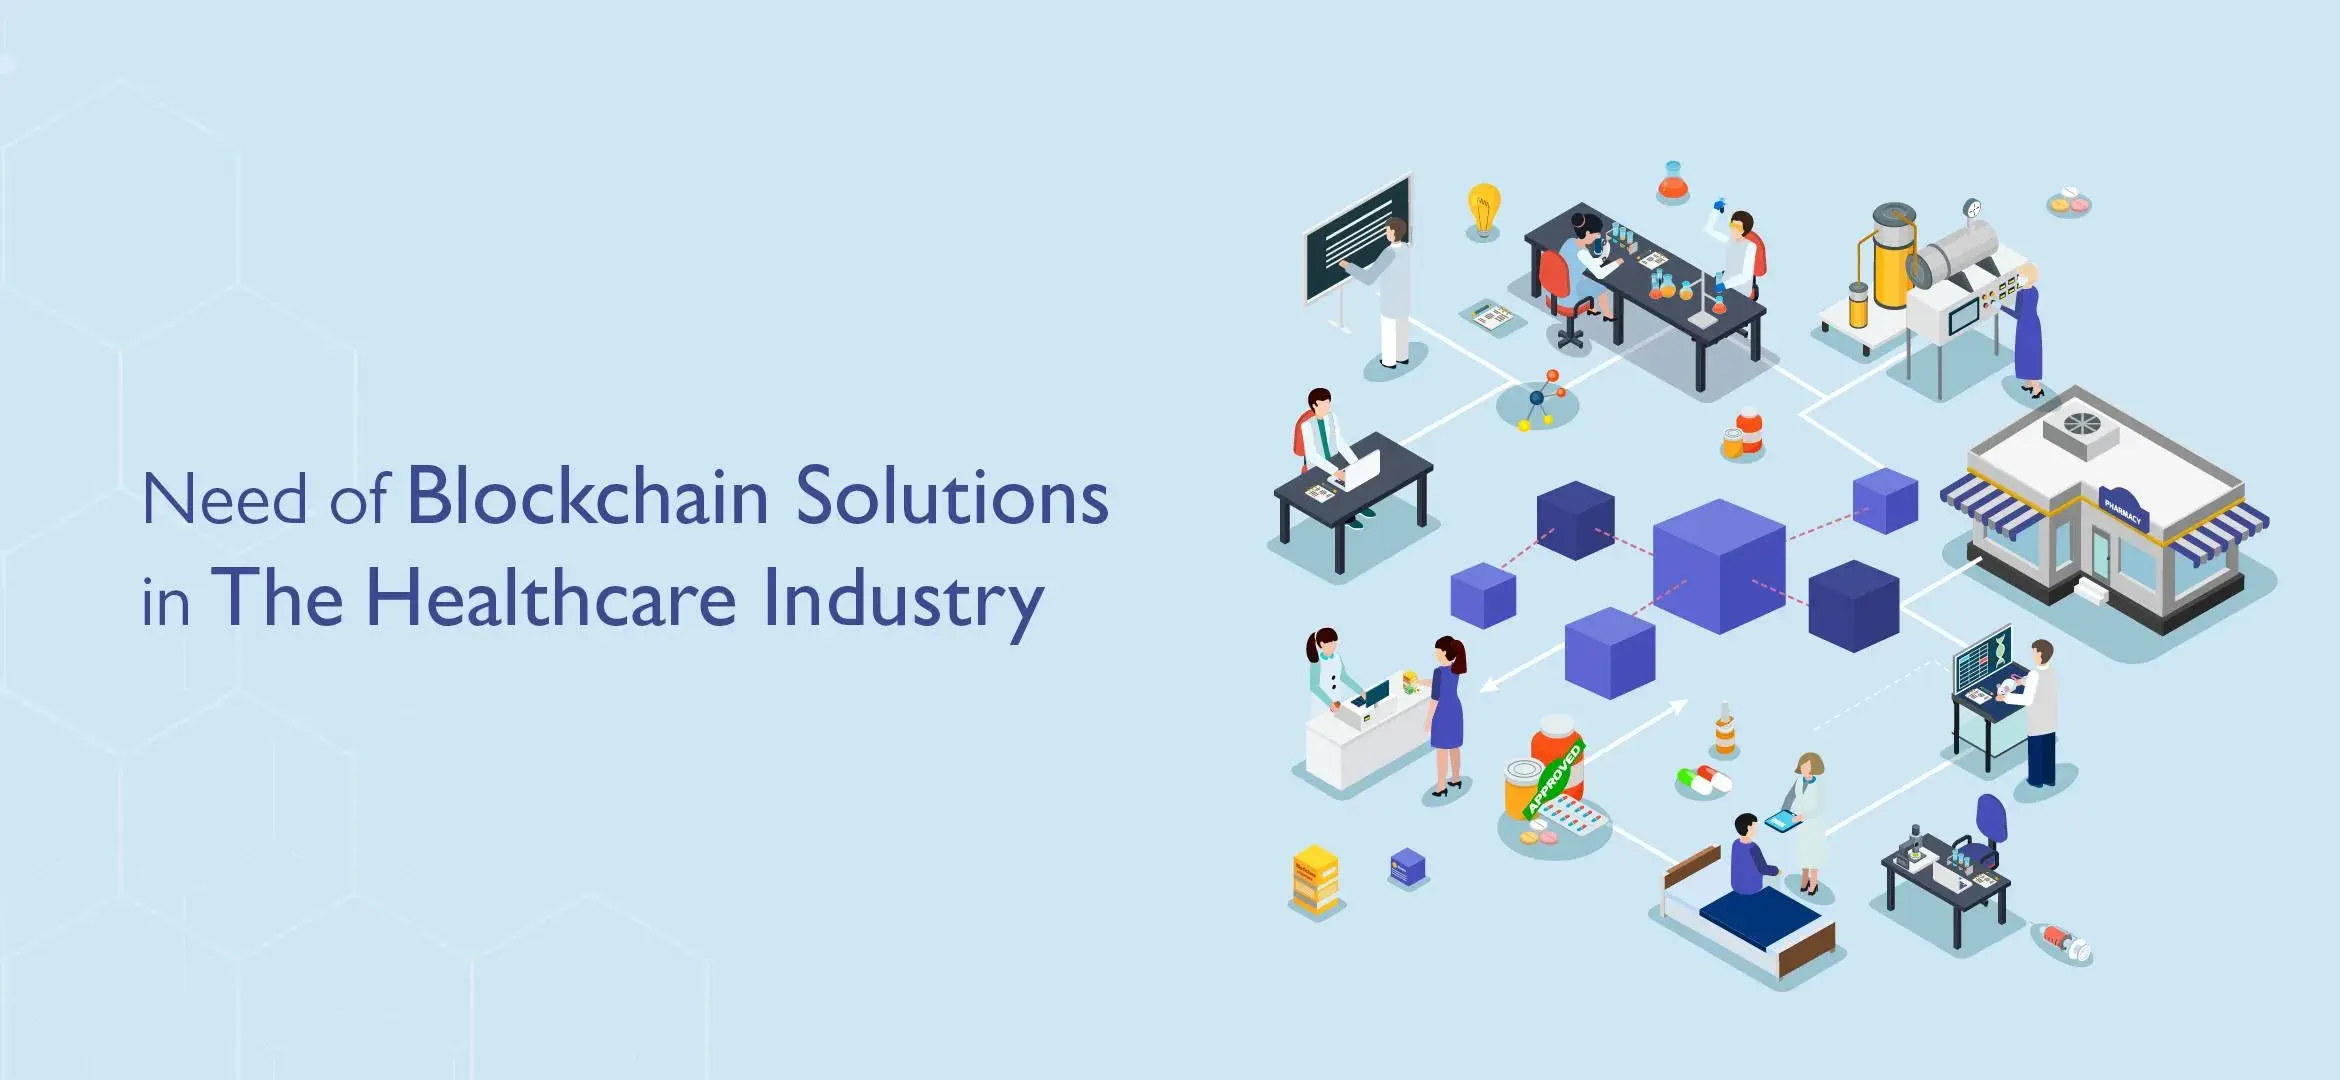 1712231986Need for Blockchain Solutions in The Healthcare Industry.webp